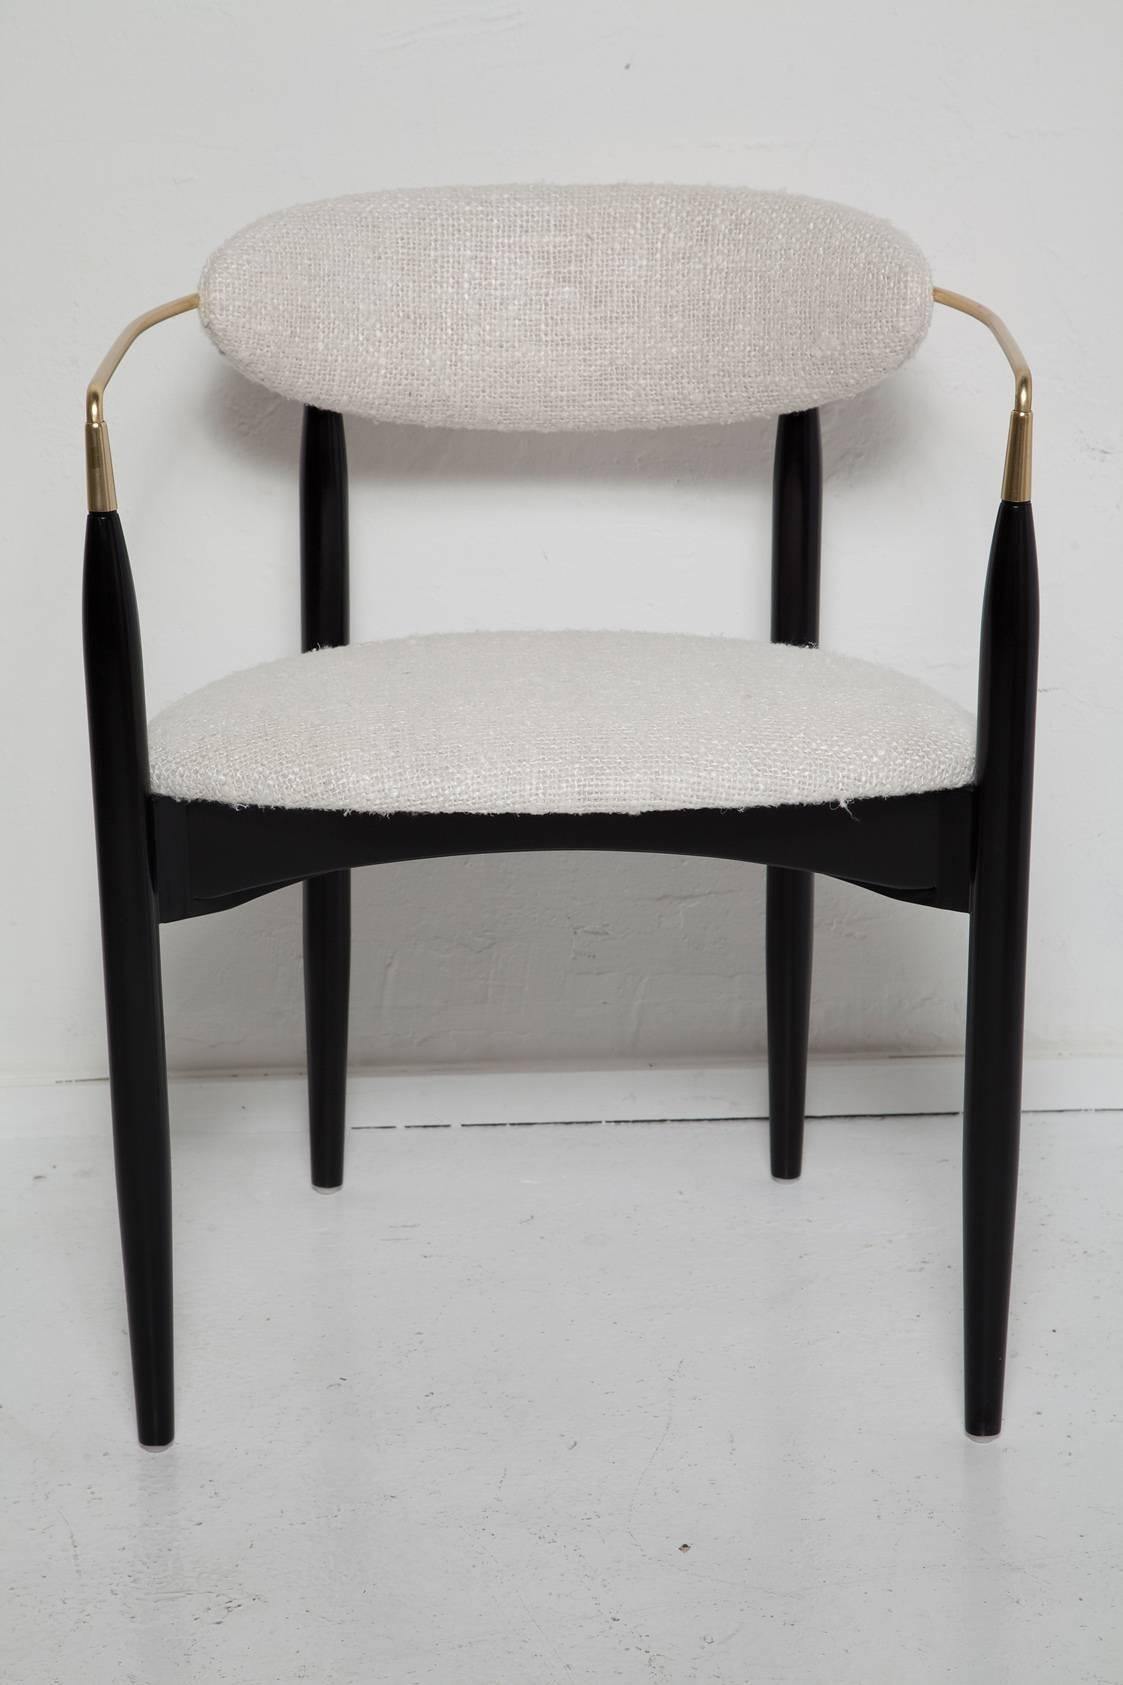 Anodized Pair of Black Lacquer and Raw Silk Viscount Chairs by Dan Johnson